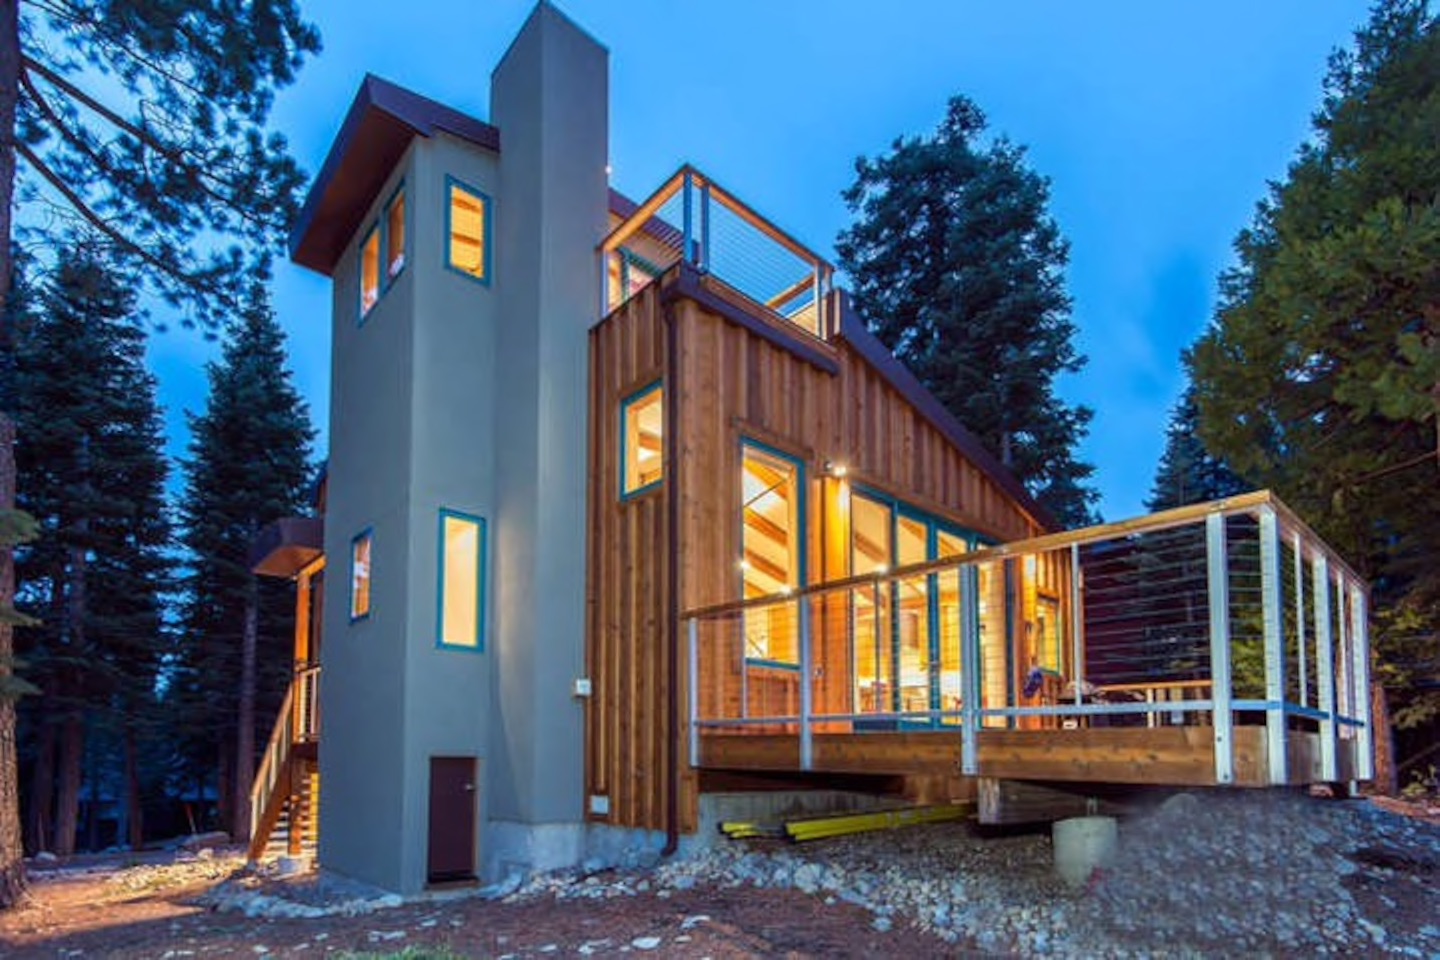 12 Best Airbnbs In Lake Tahoe (Cabins, Townhomes, and More) - Follow Me ...